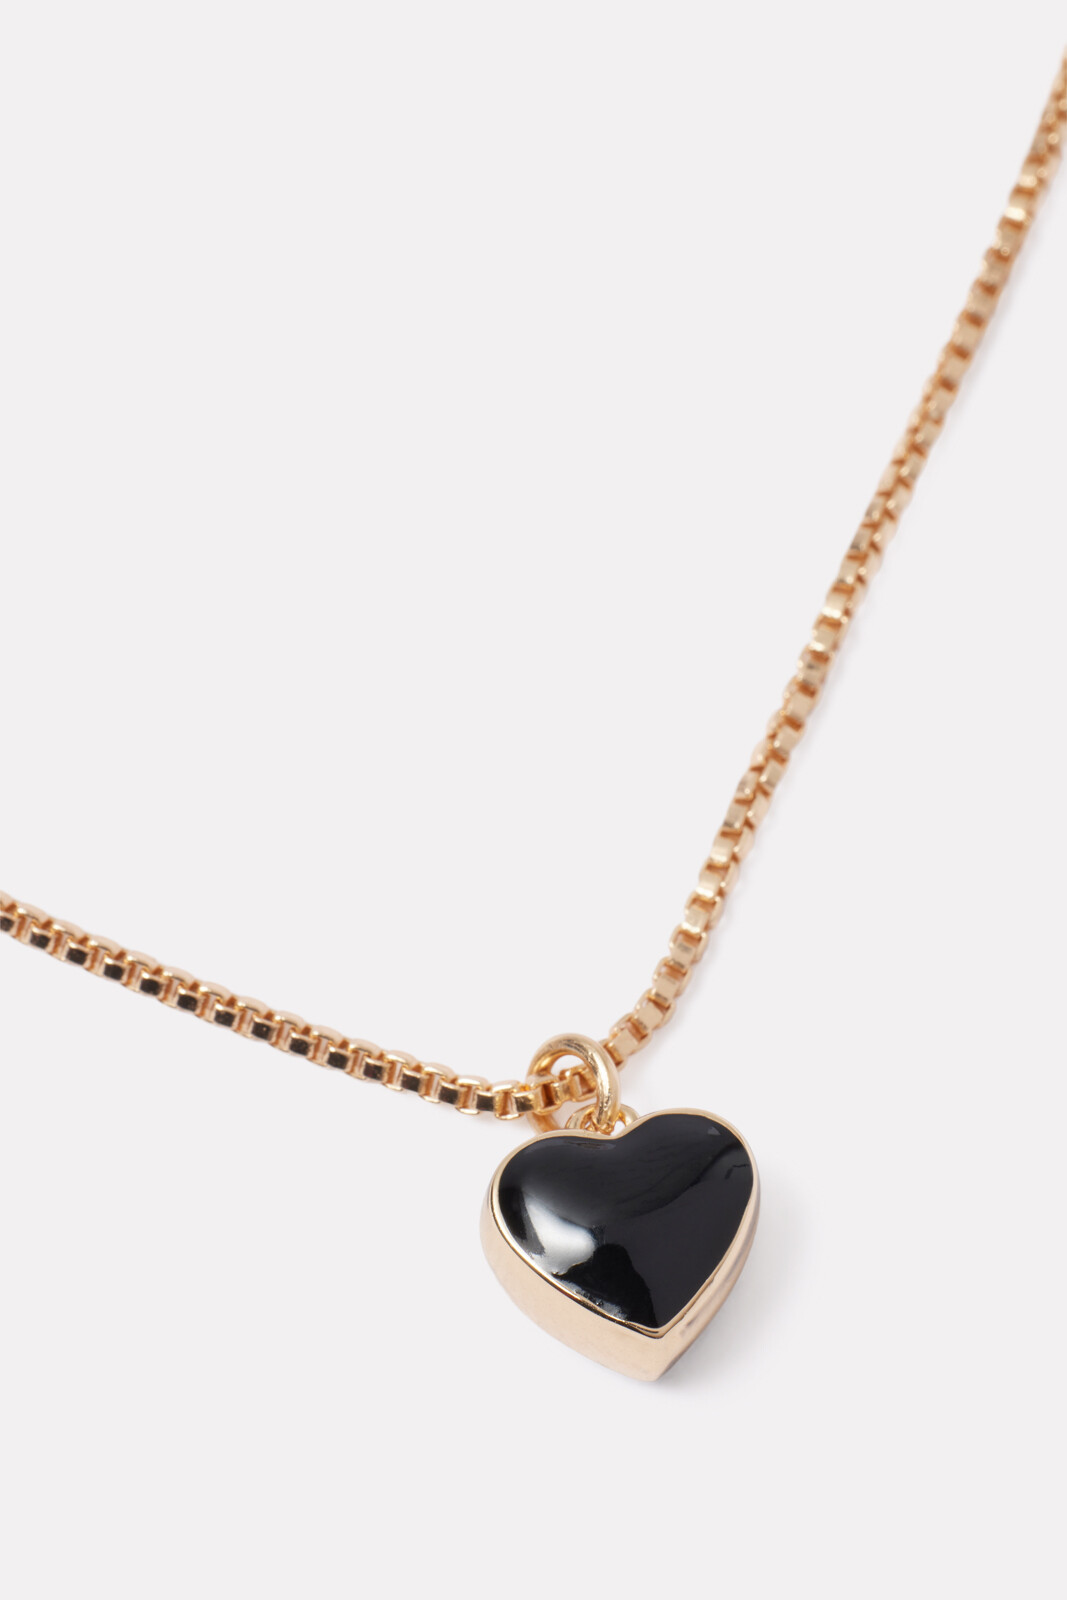 Holden Heart Necklace